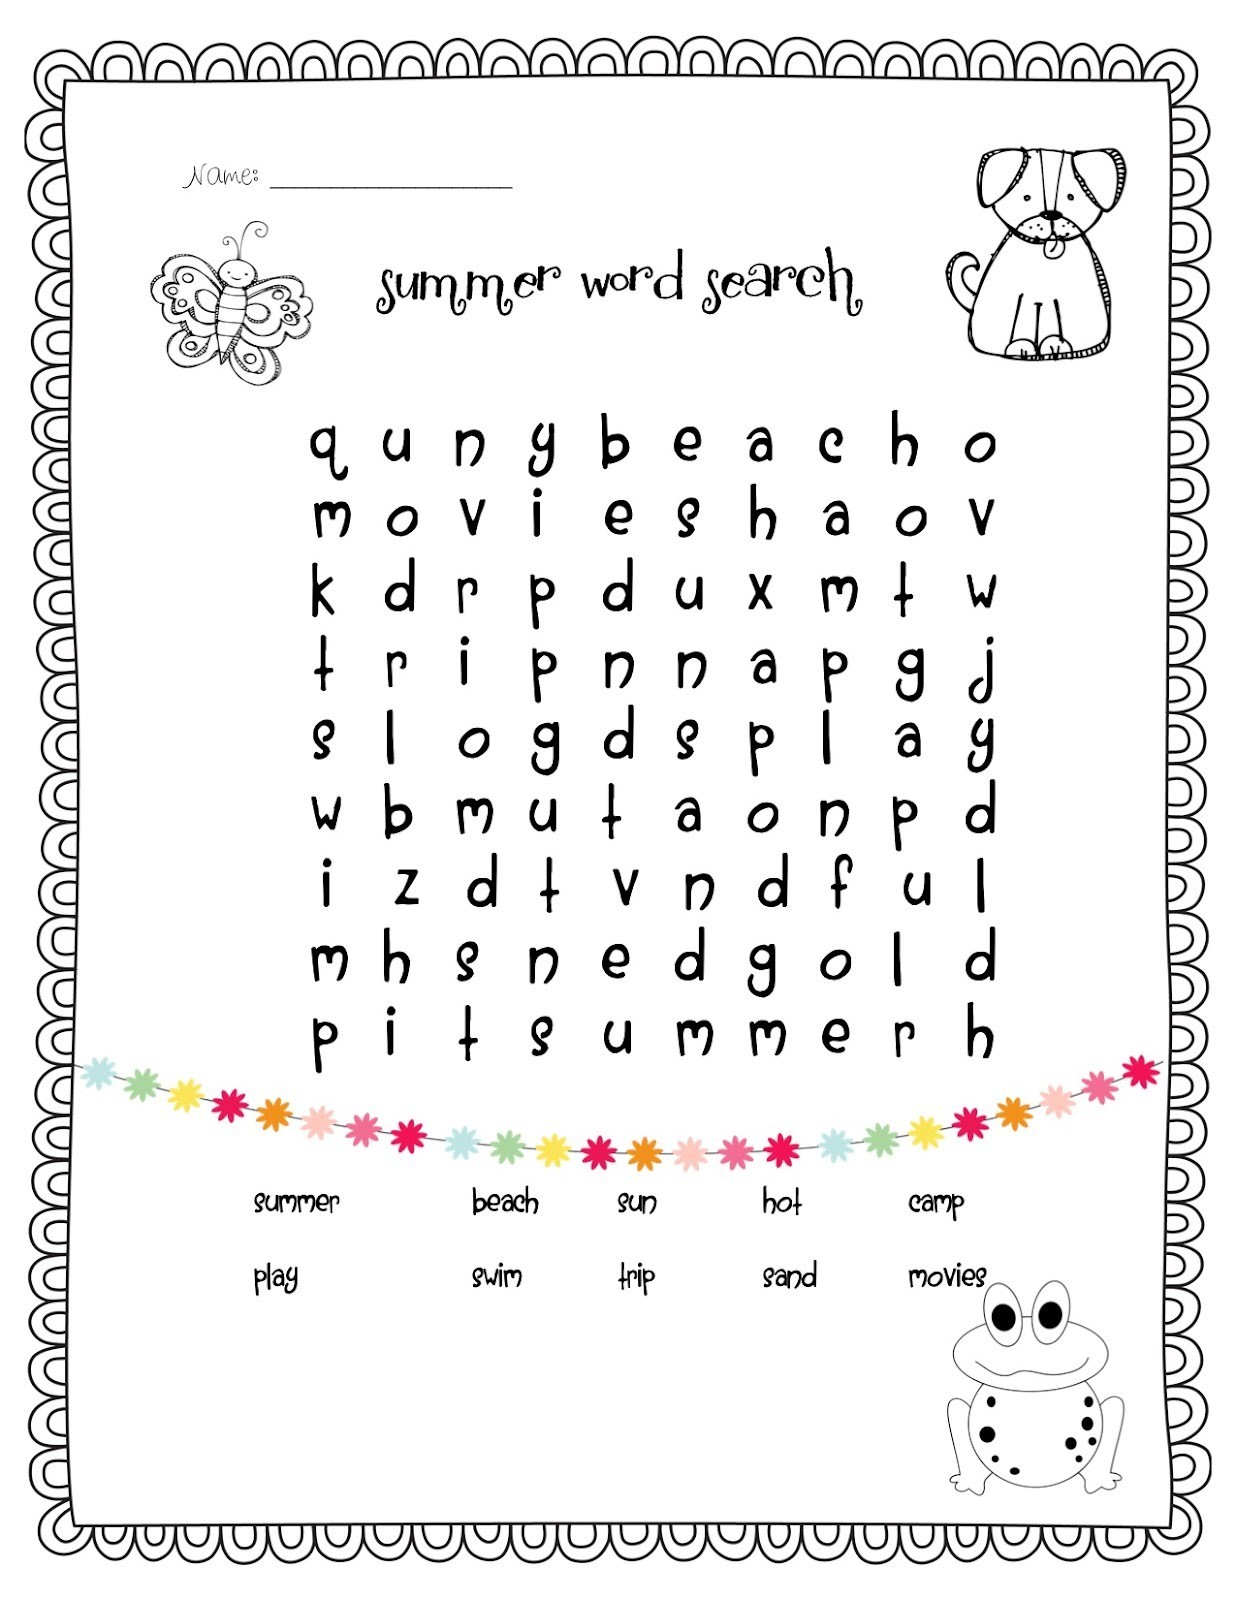 Easy word search for kids